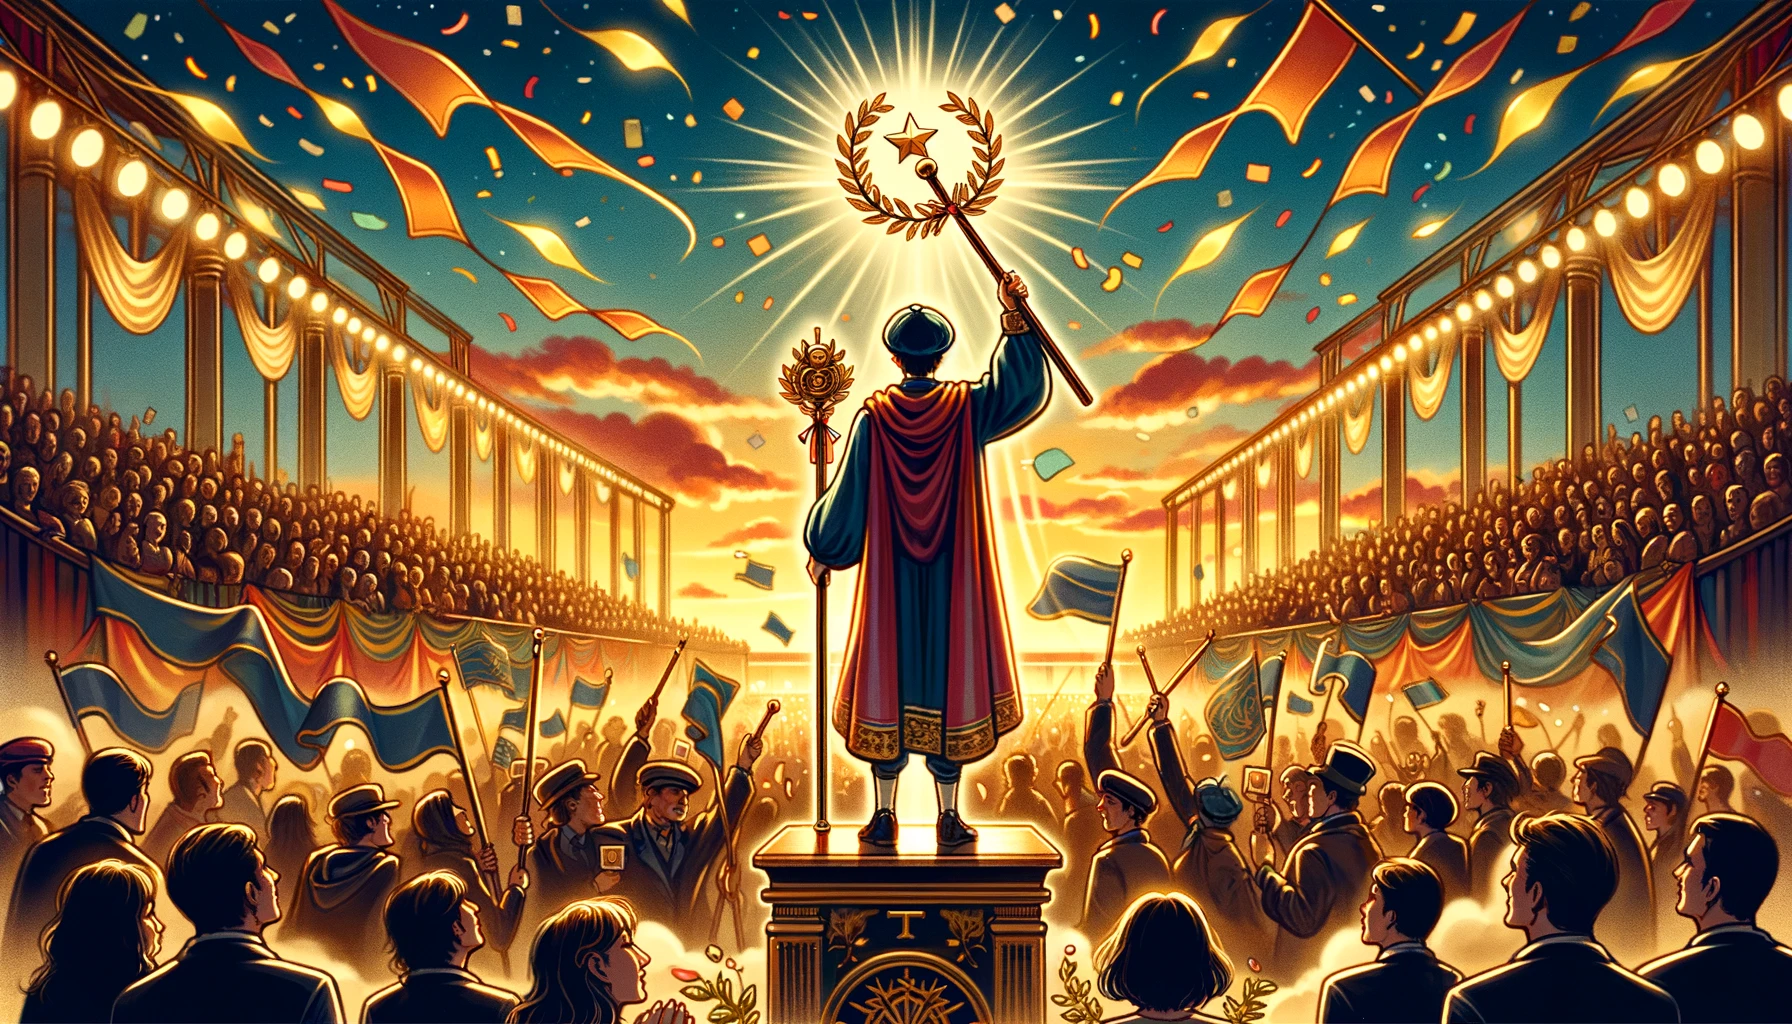 A visual representation showcasing an individual in their moment of triumph, symbolizing victory, recognition, and the desire to be celebrated for achievements. The scene depicts the person standing proudly amidst symbols of success and celebration, with a joyful expression reflecting the fulfillment of being recognized and appreciated. The backdrop is filled with diverse signs of celebration, emphasizing the various areas in life where one can achieve and be acknowledged for success.